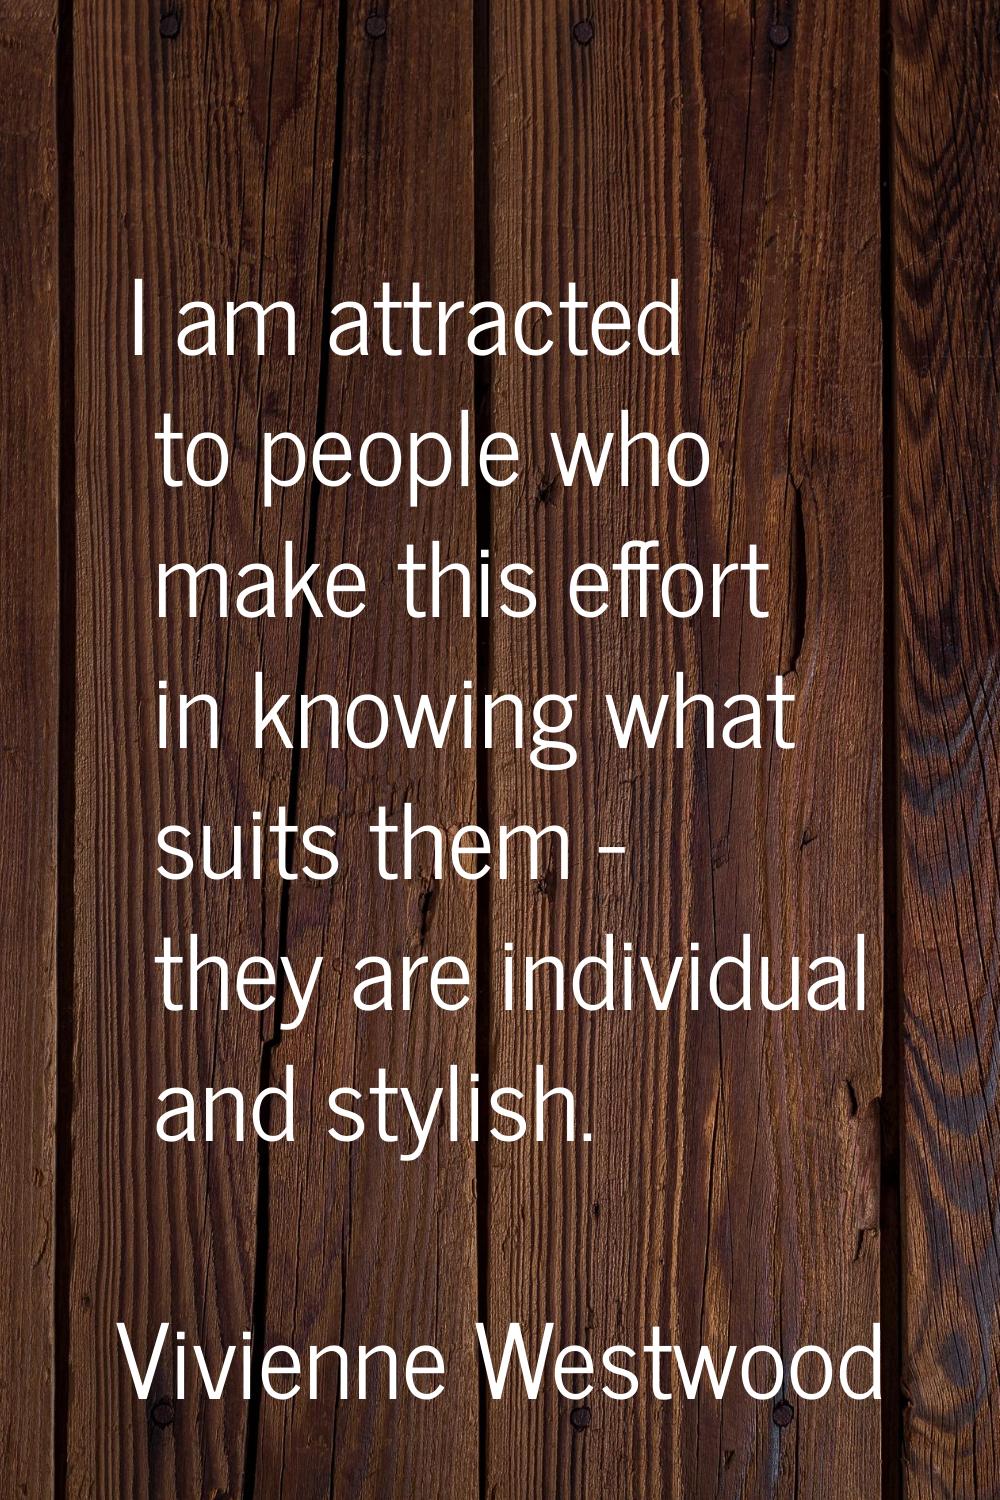 I am attracted to people who make this effort in knowing what suits them - they are individual and 